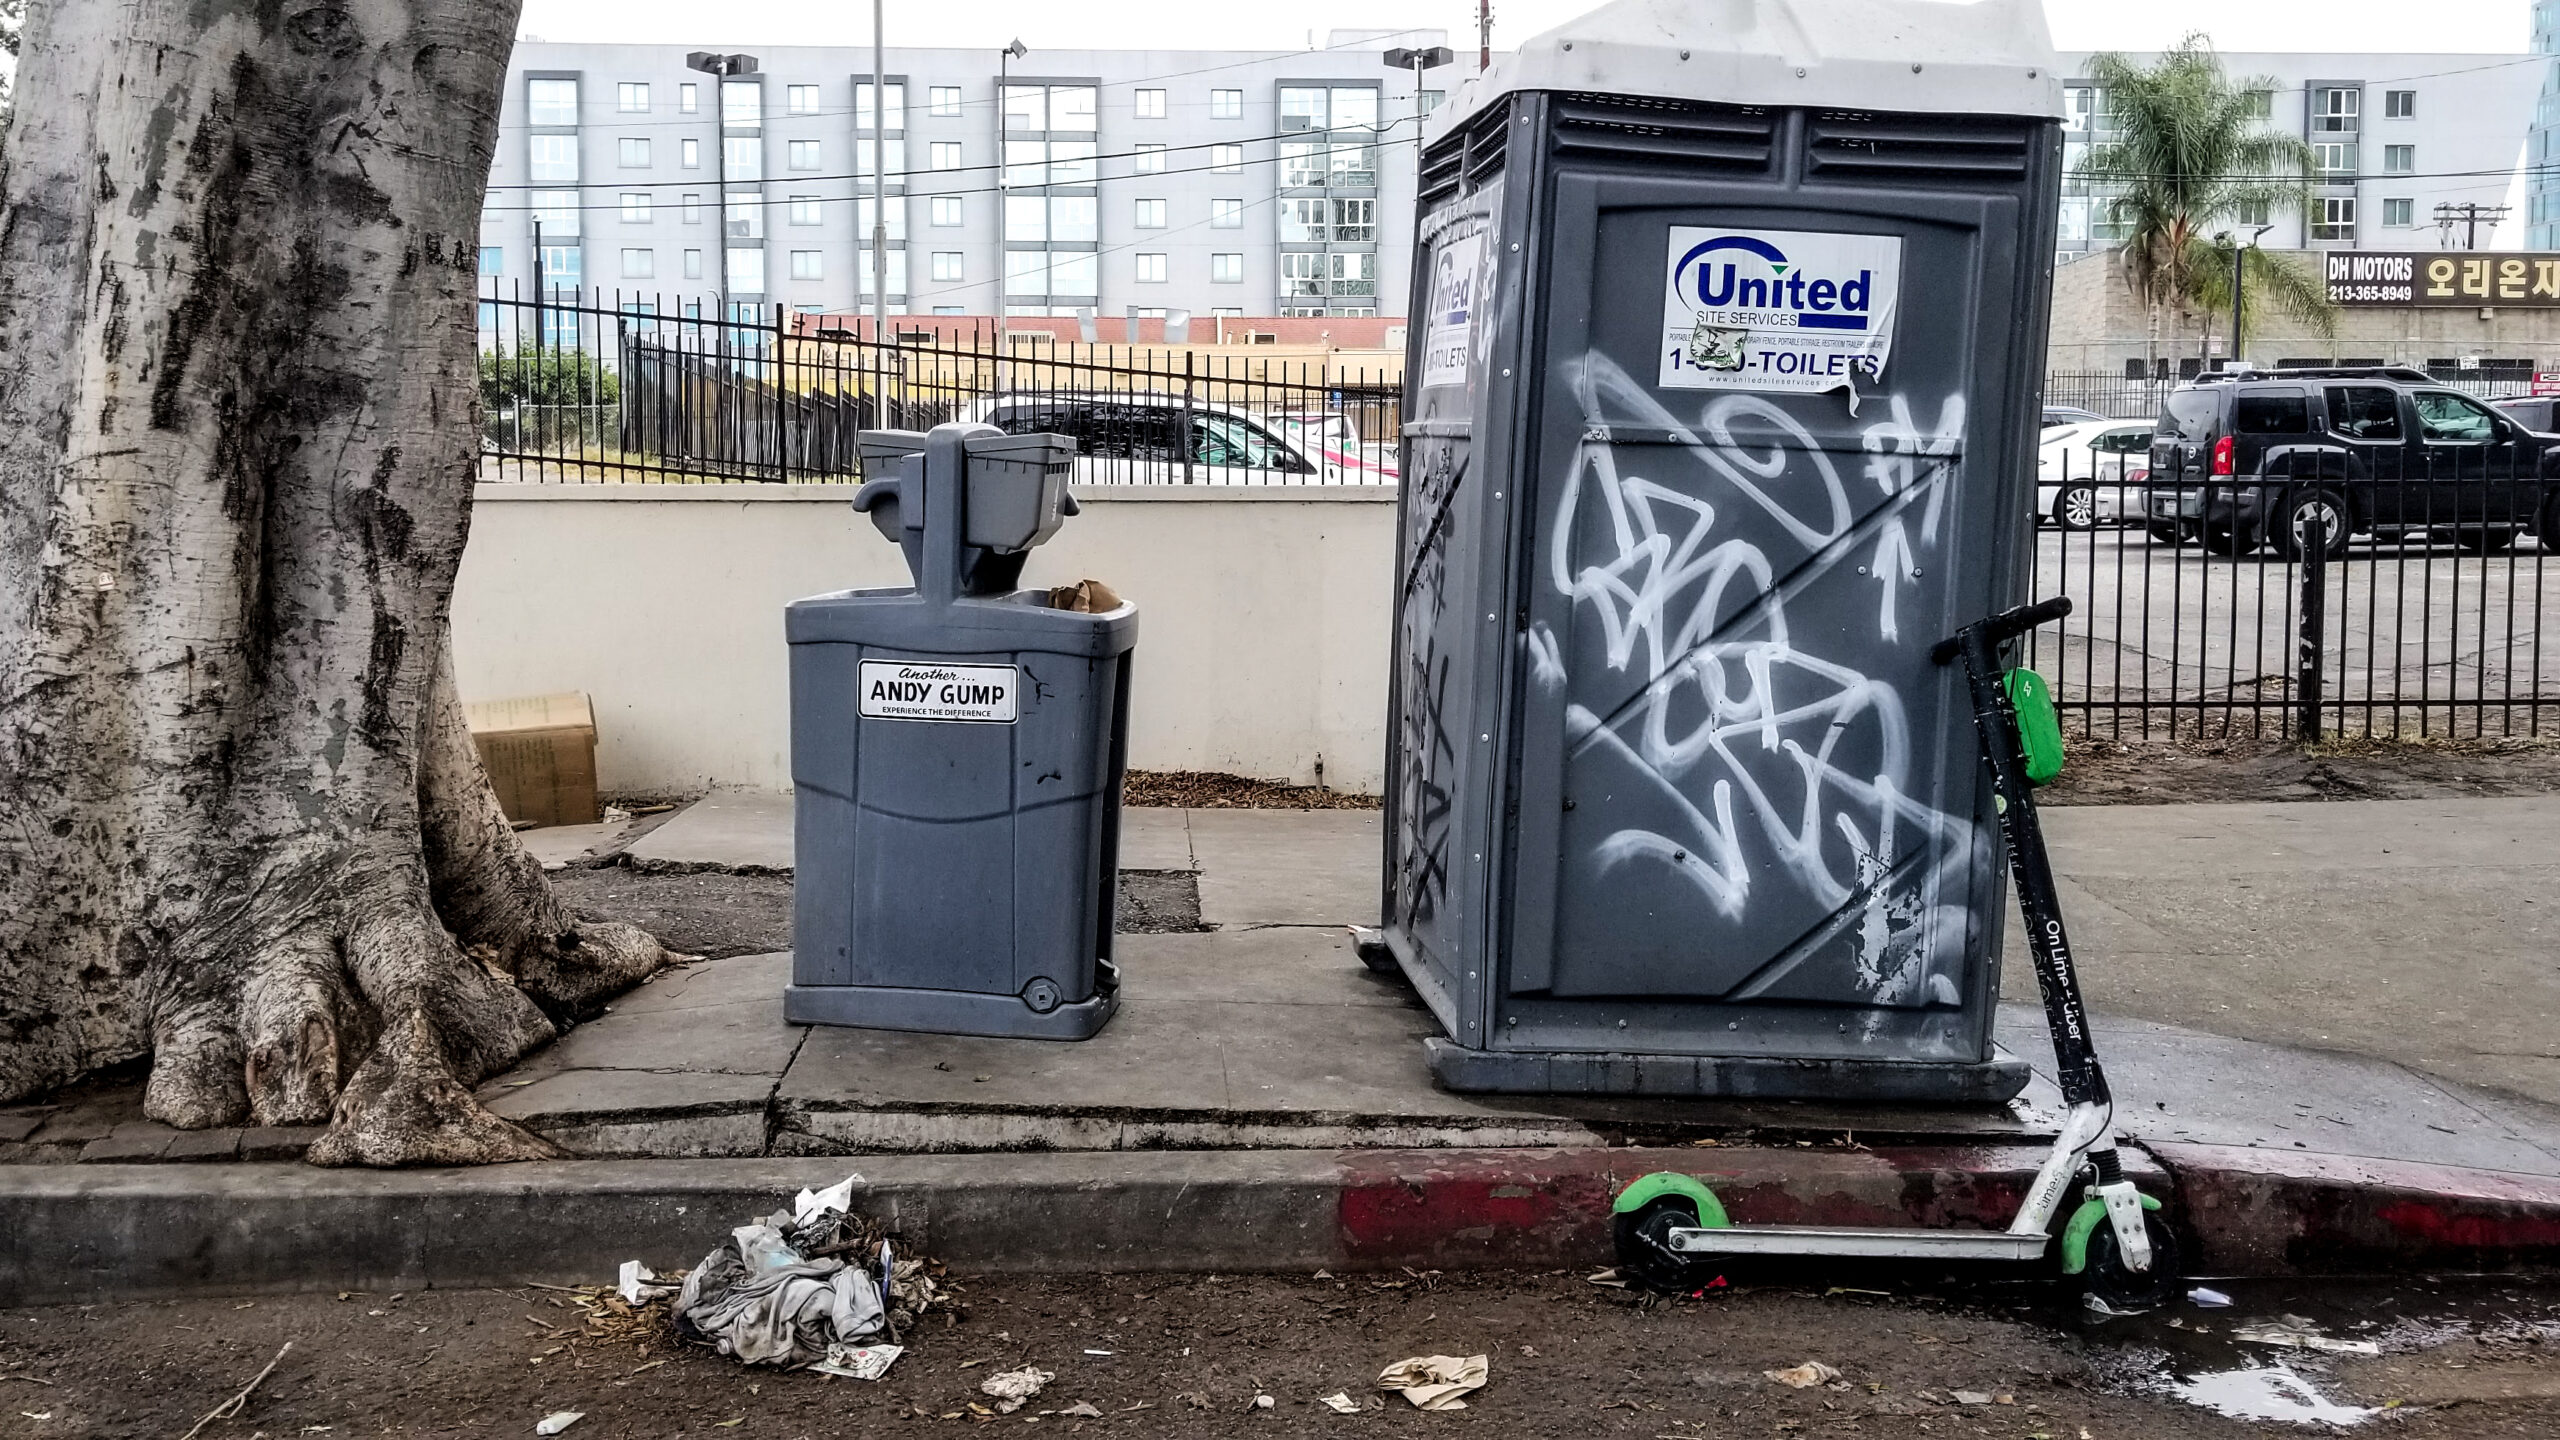 A portable sink and toilet on a sidewalk in Koreatown (2021)